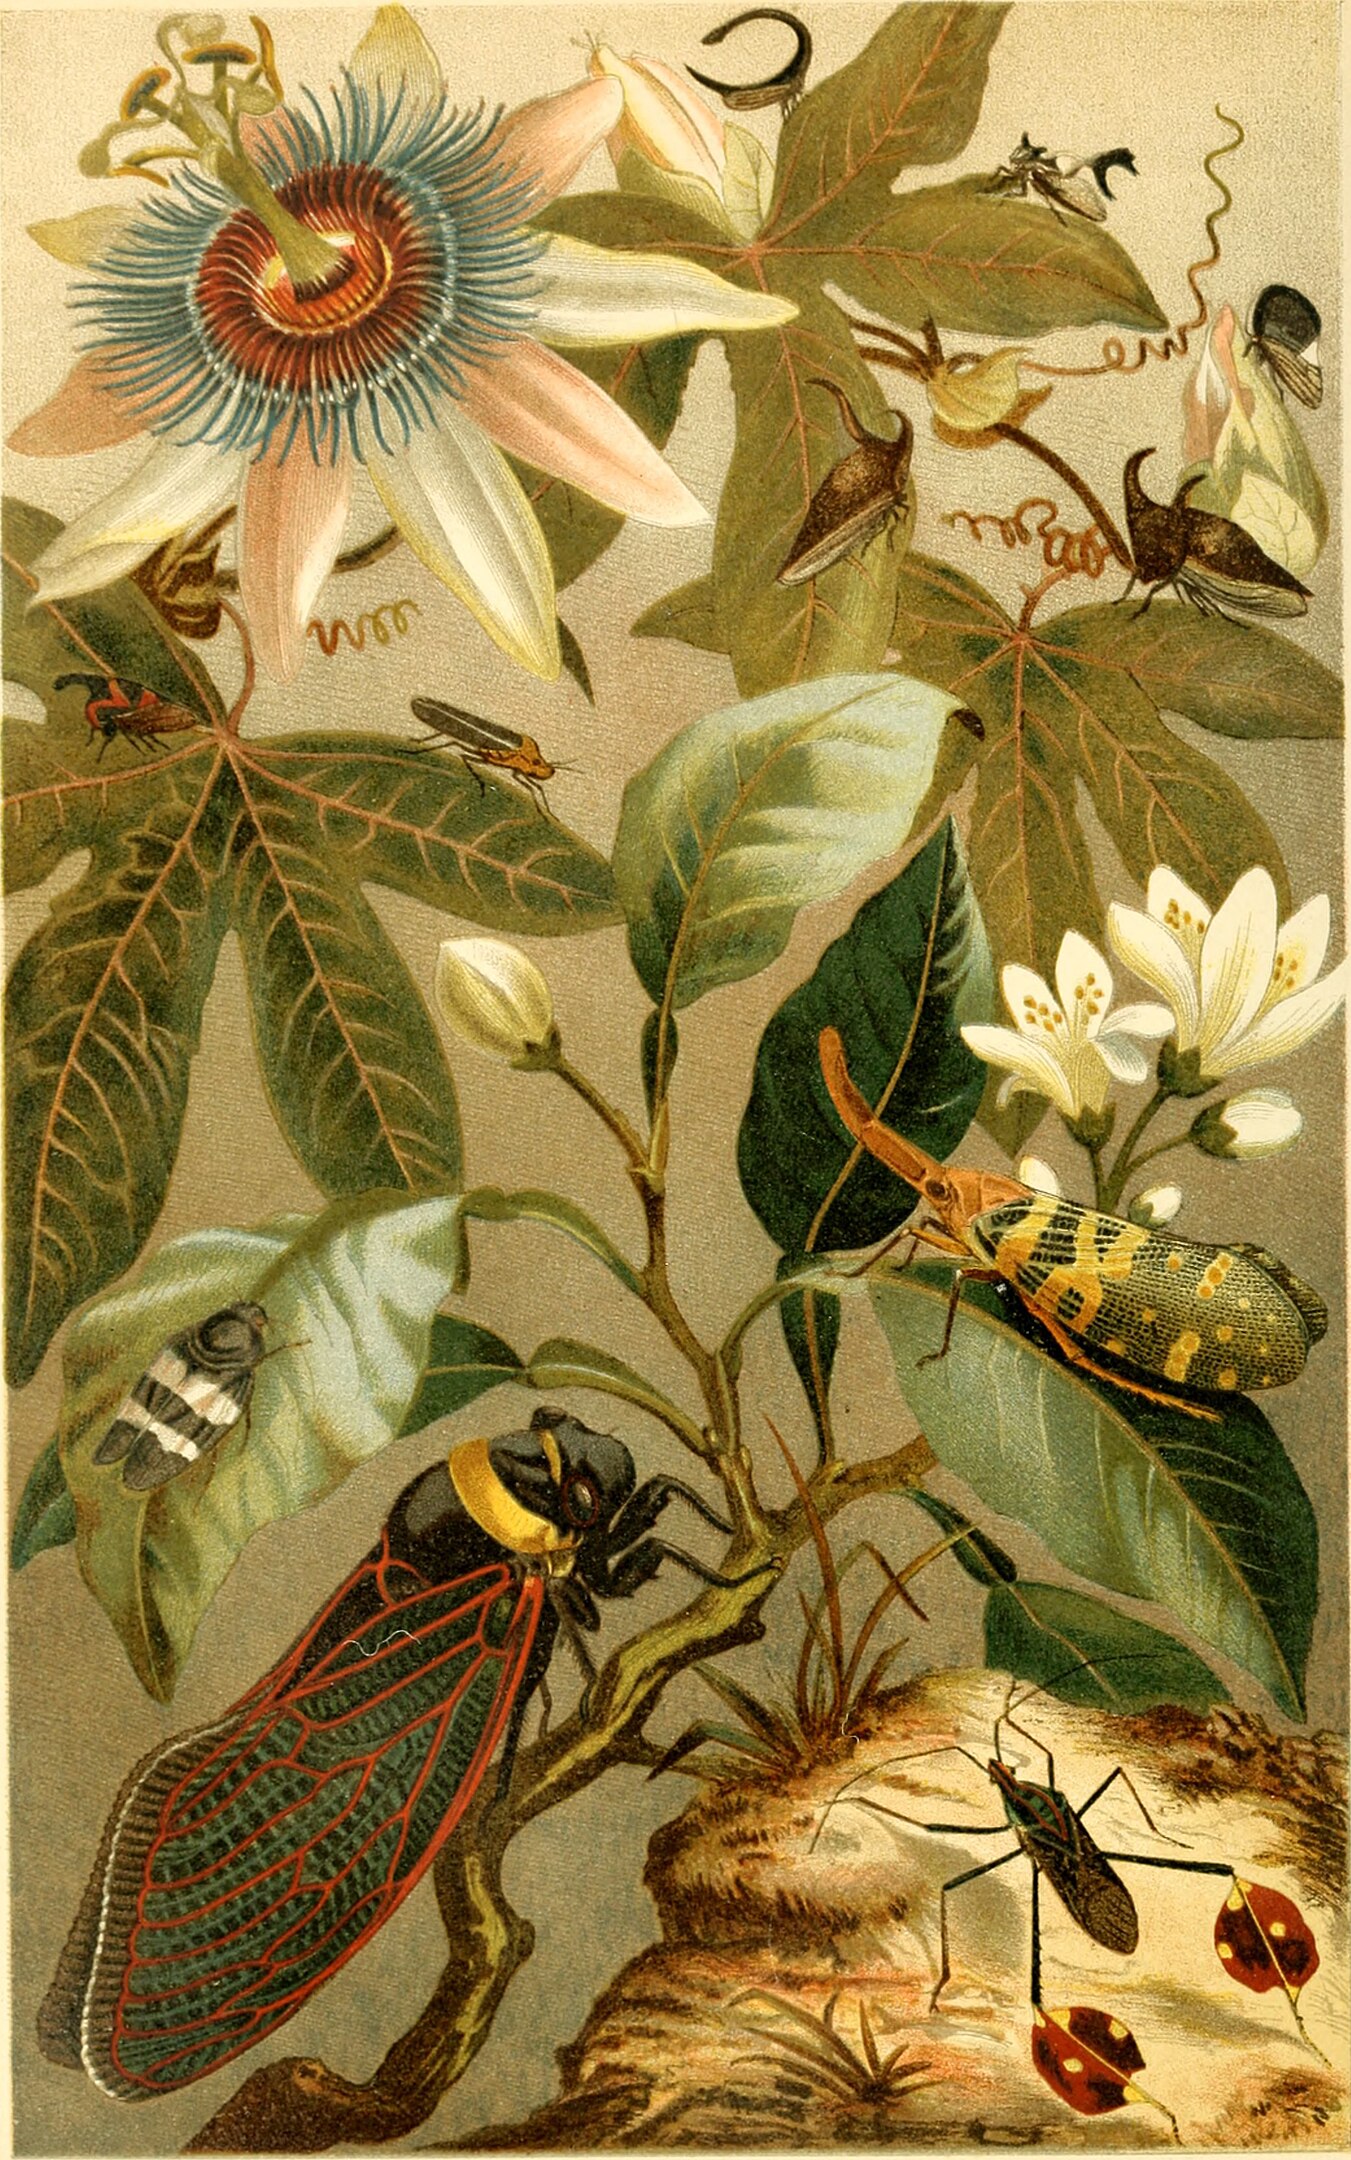 A botanical illustration of large flowers and insects